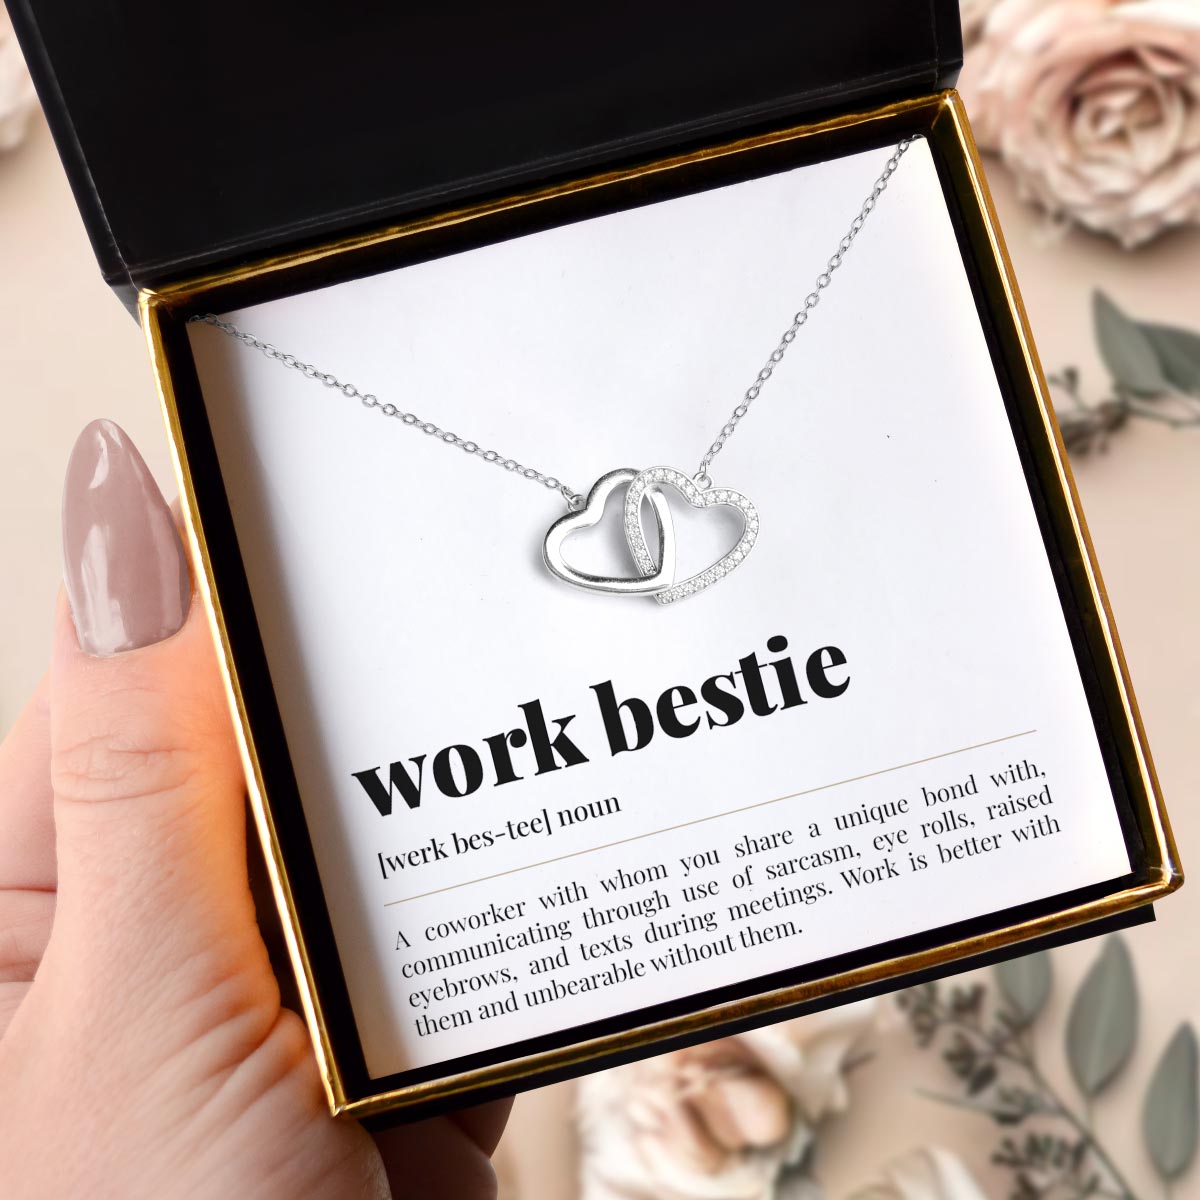 Work Bestie Noun - Sterling Silver Joined Hearts Necklace Gift Set